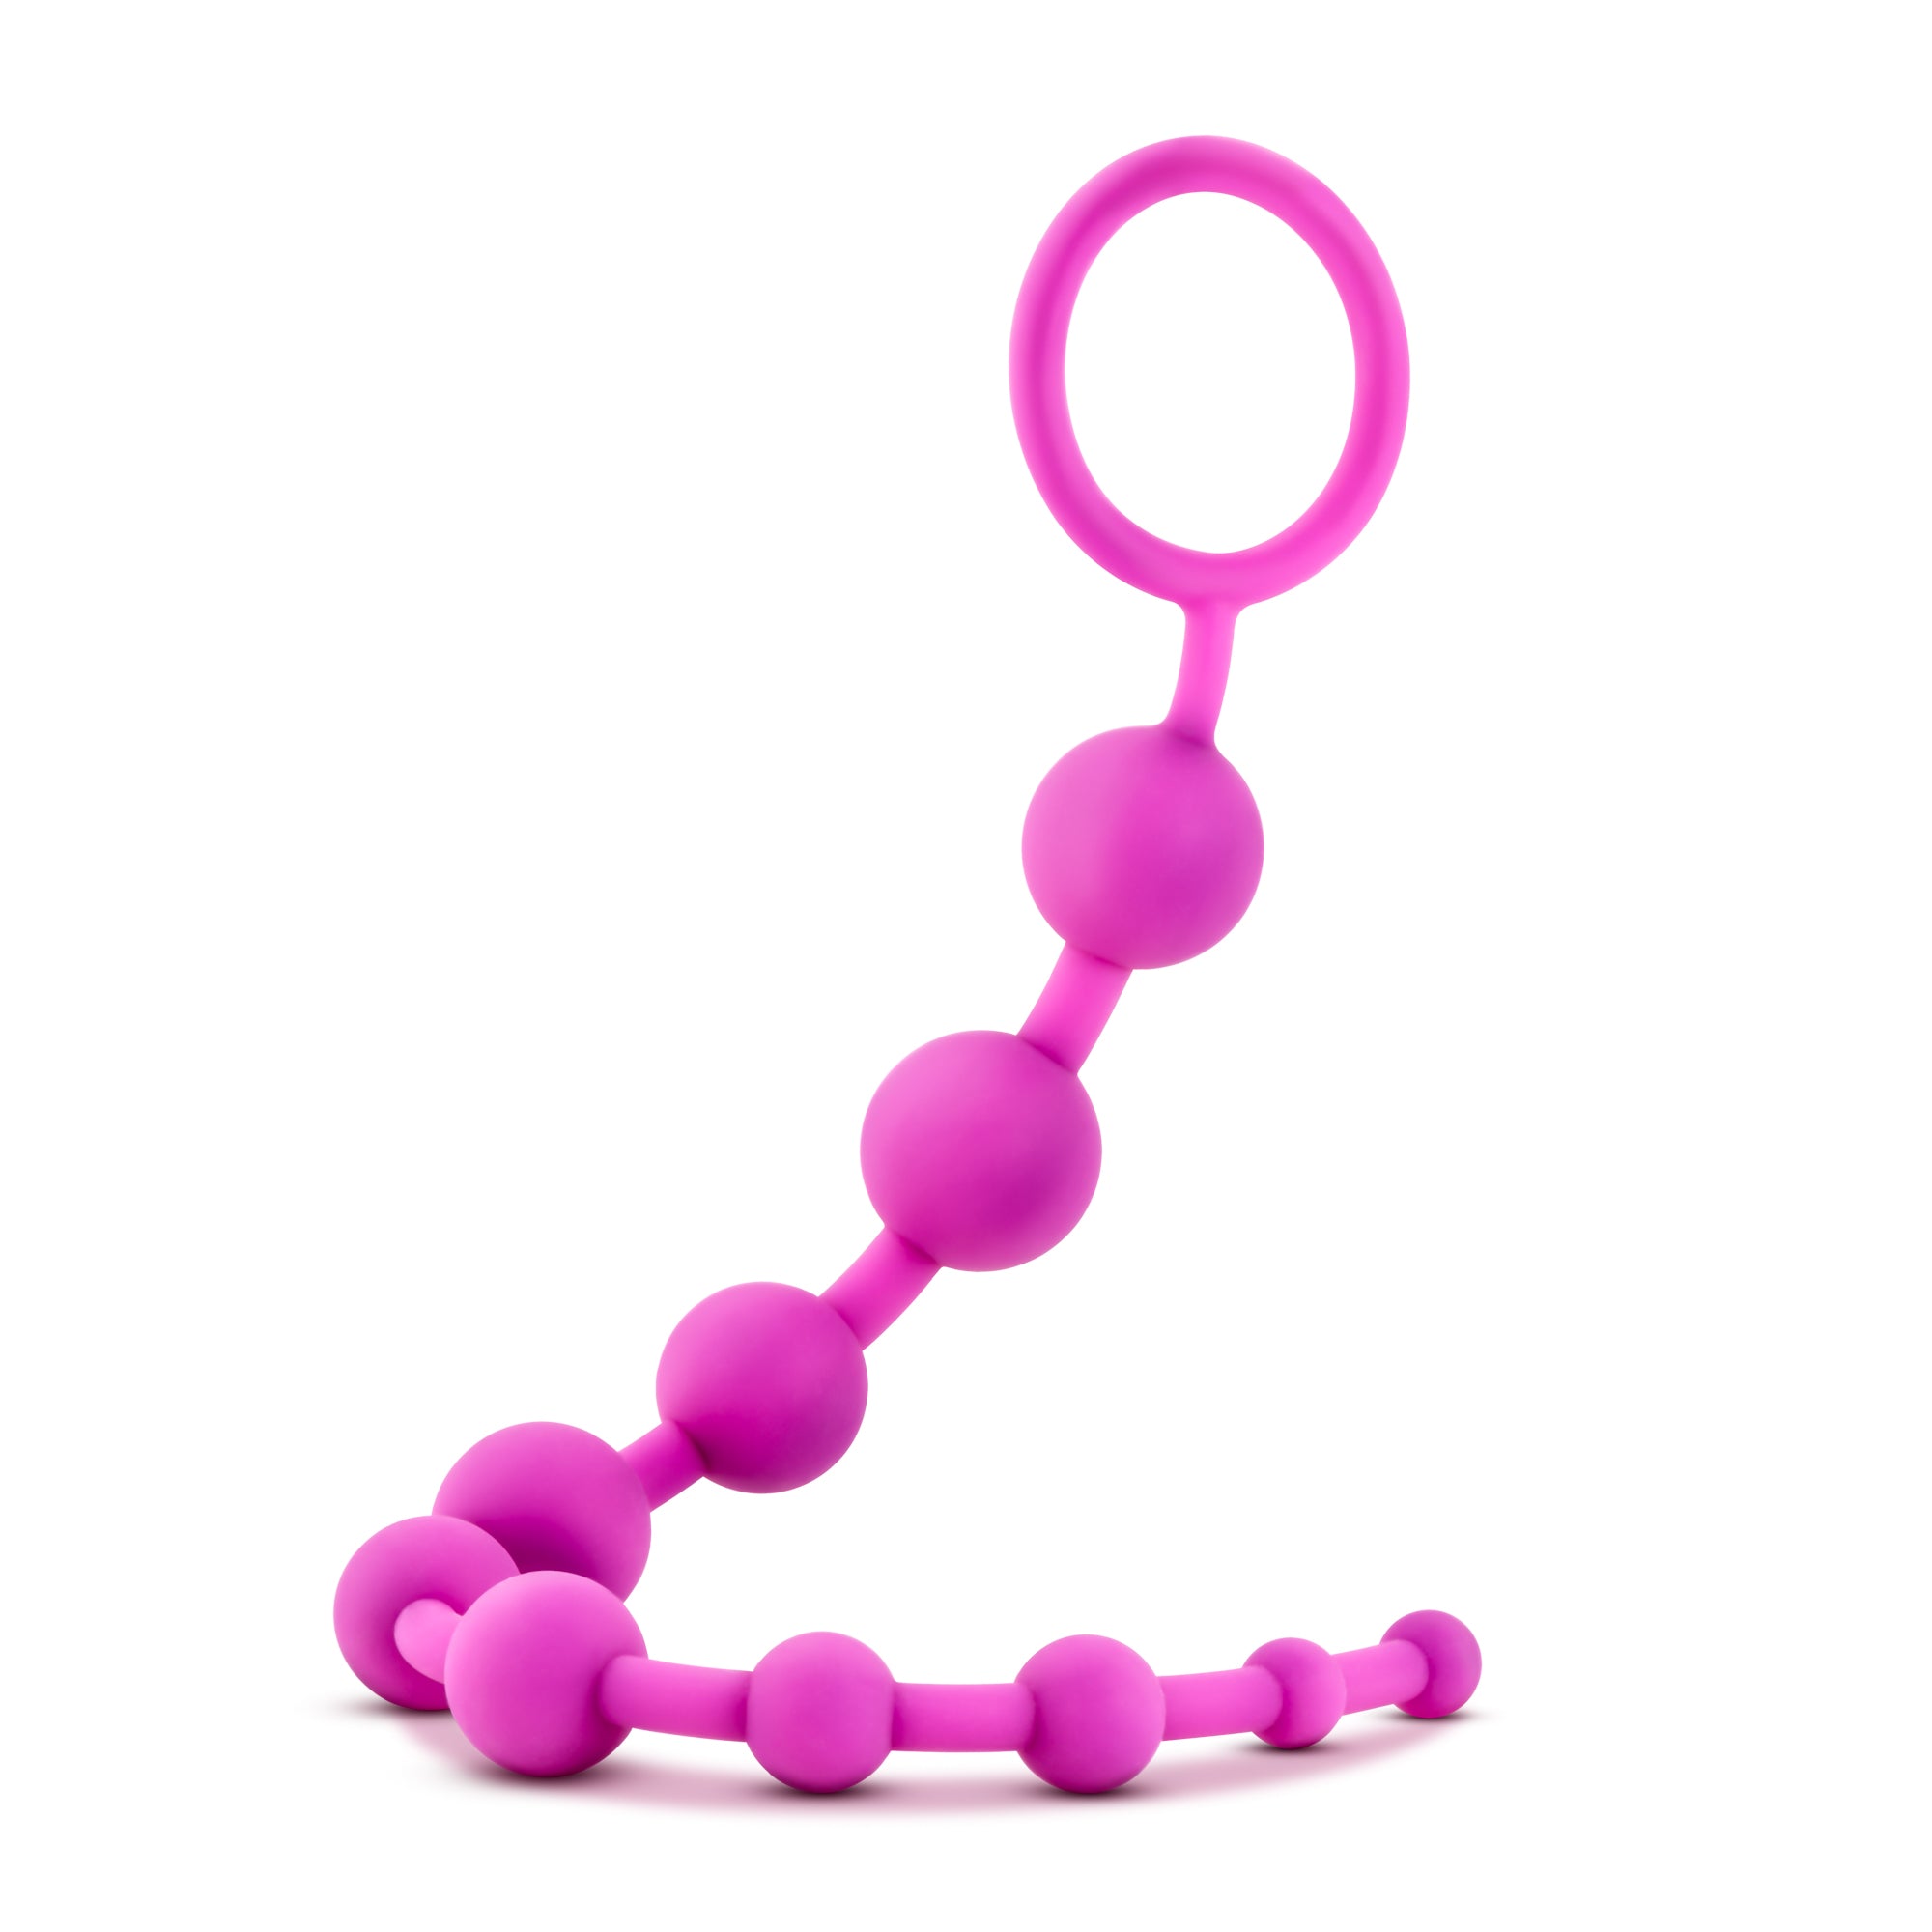 Luxe - Silicone 10 Beads - Pink